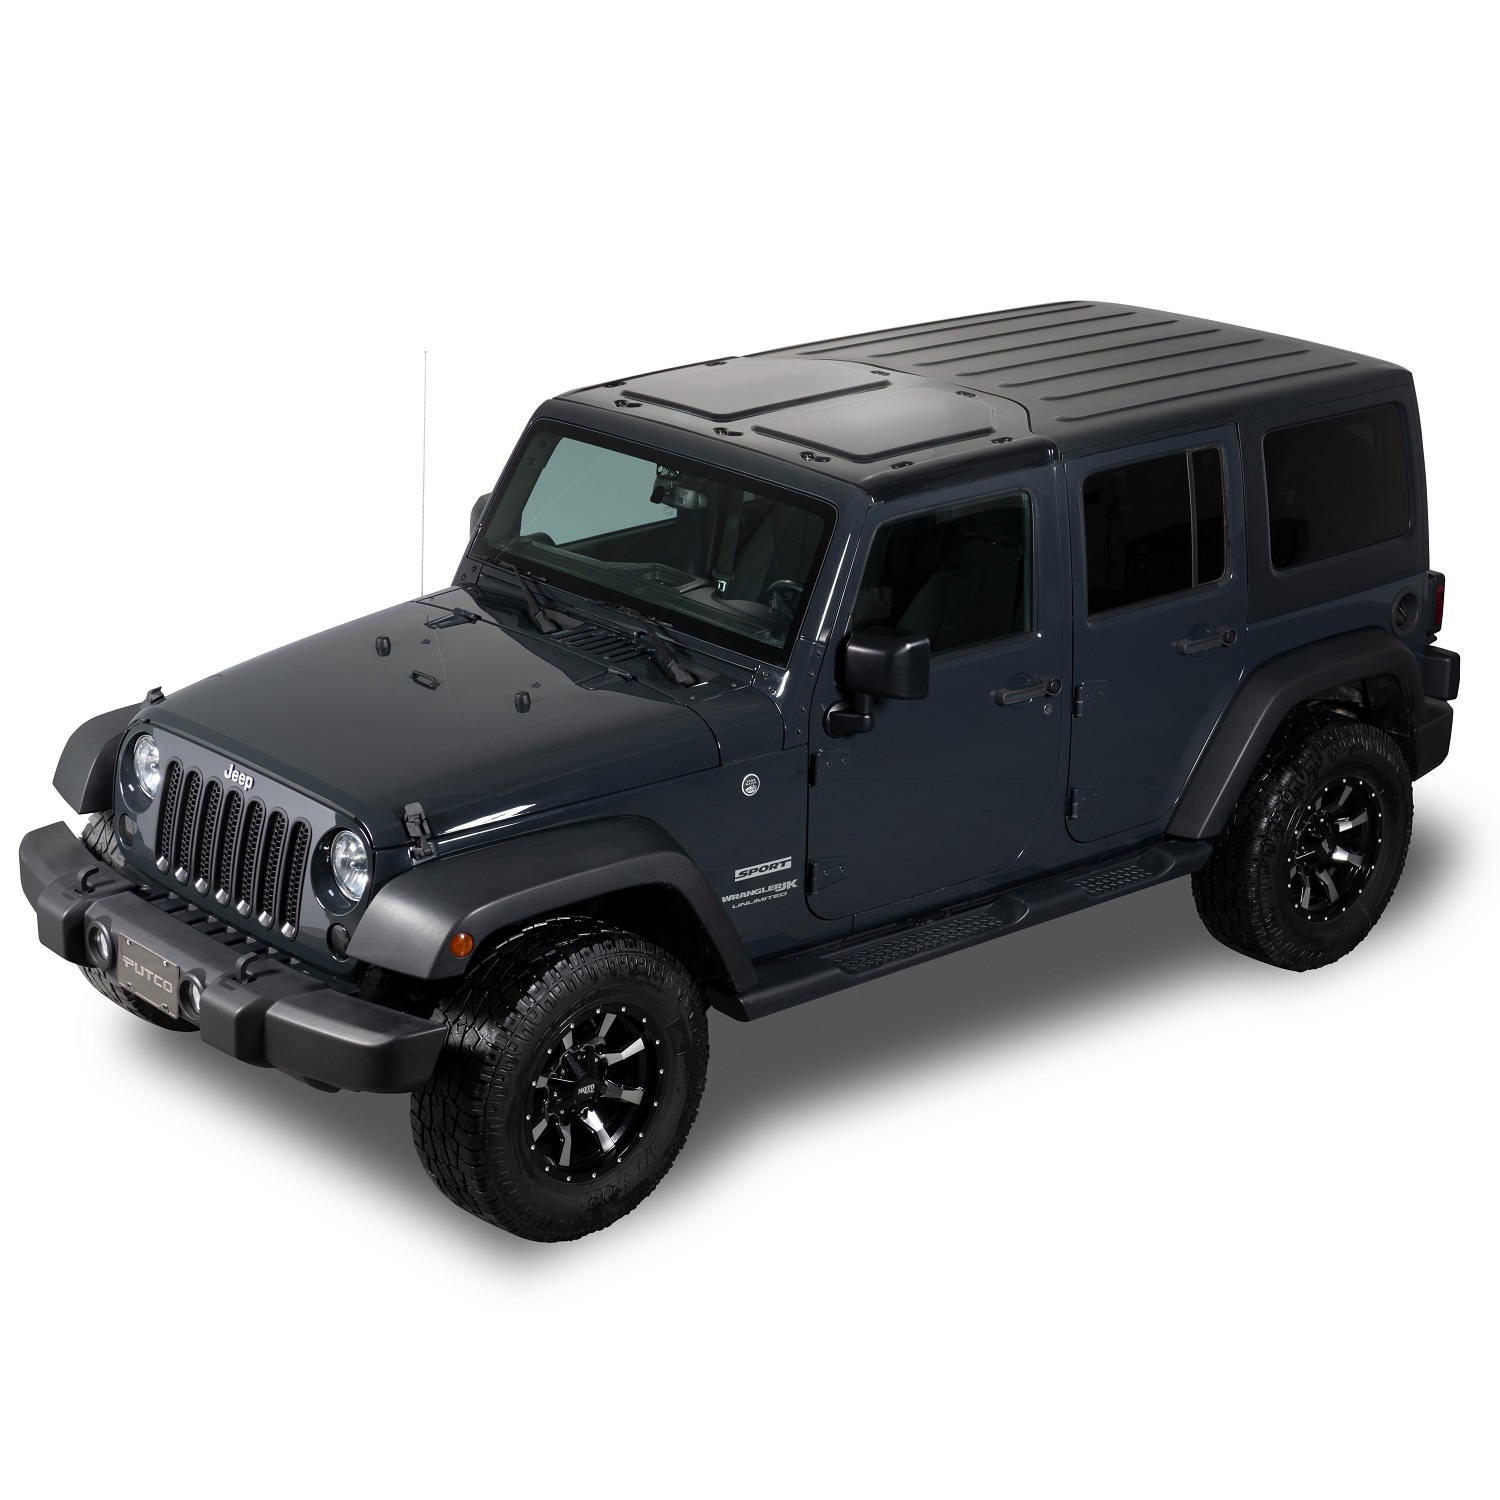 581003 - 09-18 Jeep Wrangler JK Putco Element Sky View Clear Hard Top Roof  Lid for Factory Hard Top